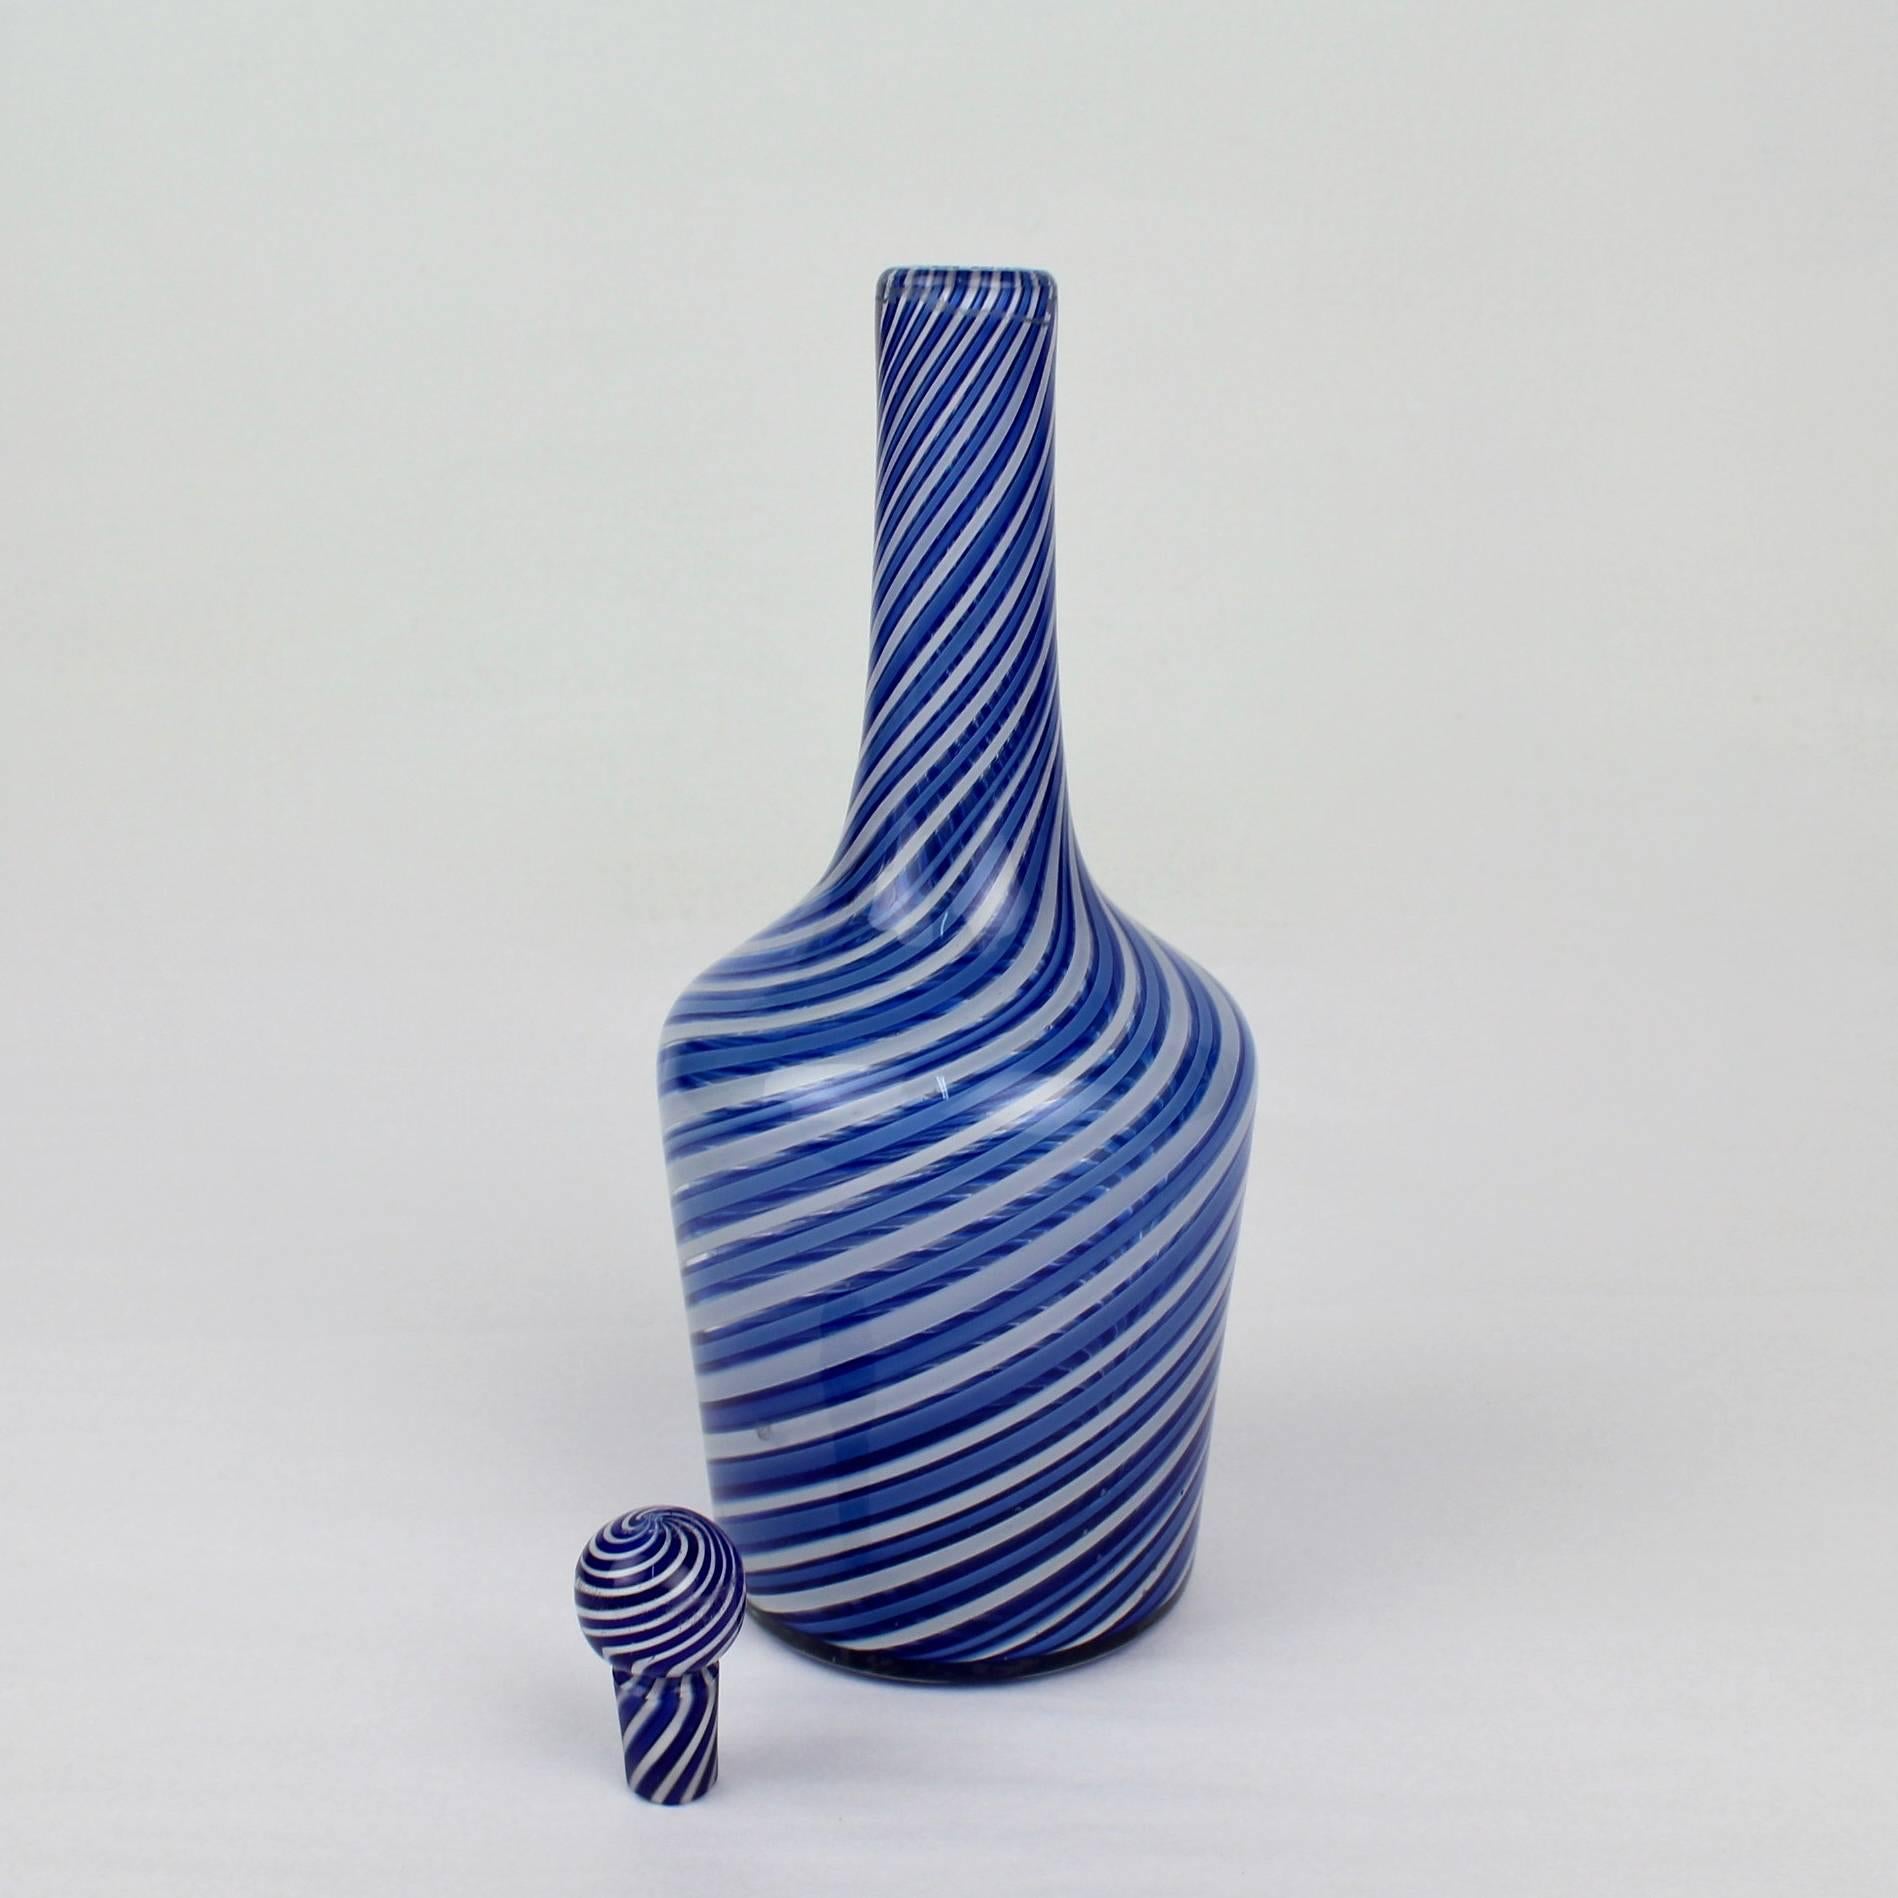 A rare and visually compelling, diminutive decanter by the 19th century French glass house Clichy. 

Blue and white canes with a right hand twist comprise the decanter body with an elongated neck that capped by a marble size stopper. 

Base